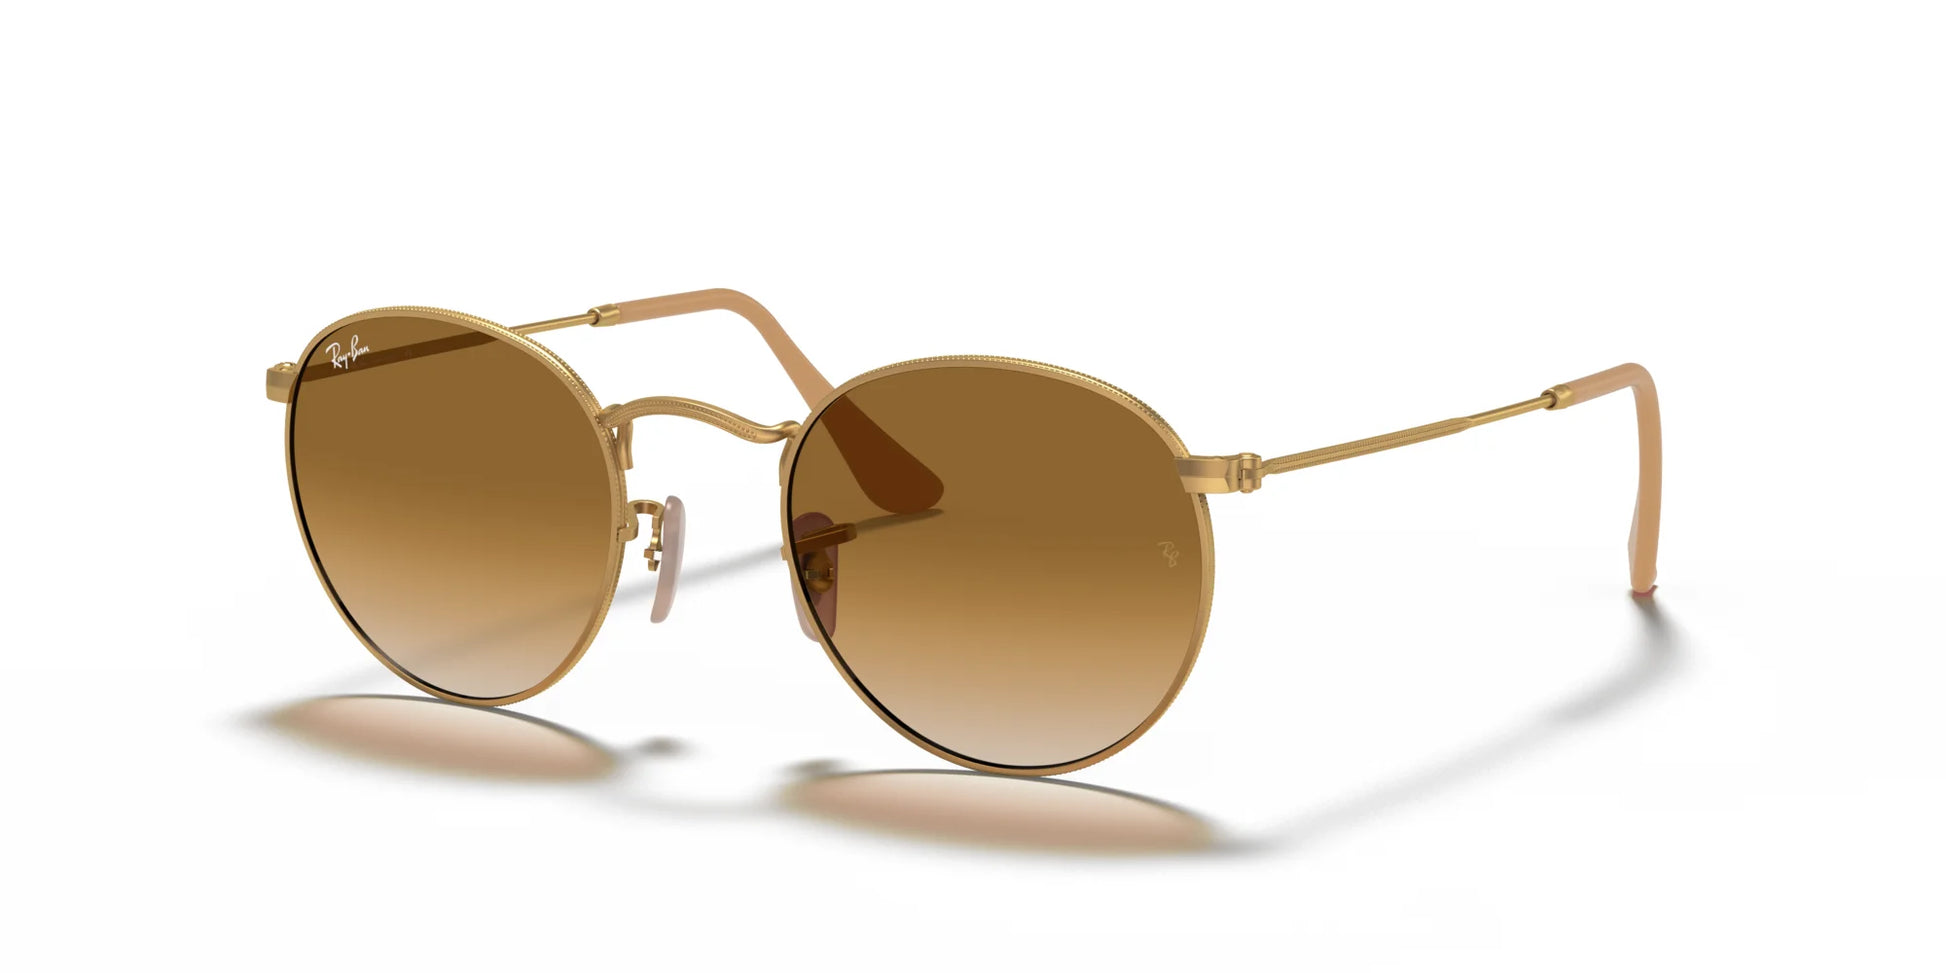 Ray-Ban ROUND METAL RB3447 Sunglasses Gold / Light Brown Gradient